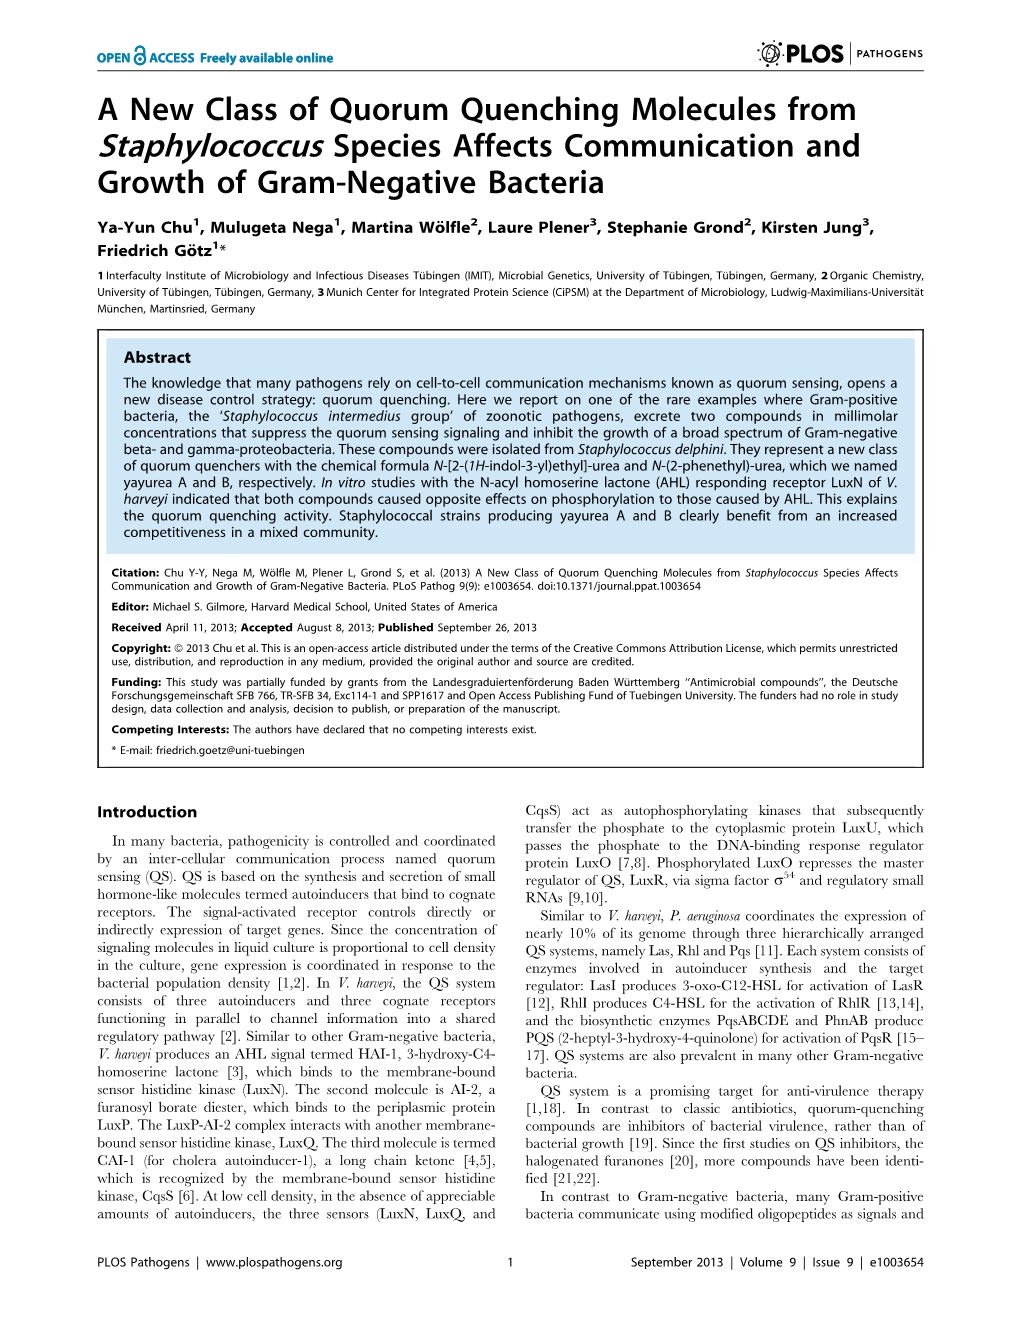 A New Class of Quorum Quenching Molecules from Staphylococcus Species Affects Communication and Growth of Gram-Negative Bacteria